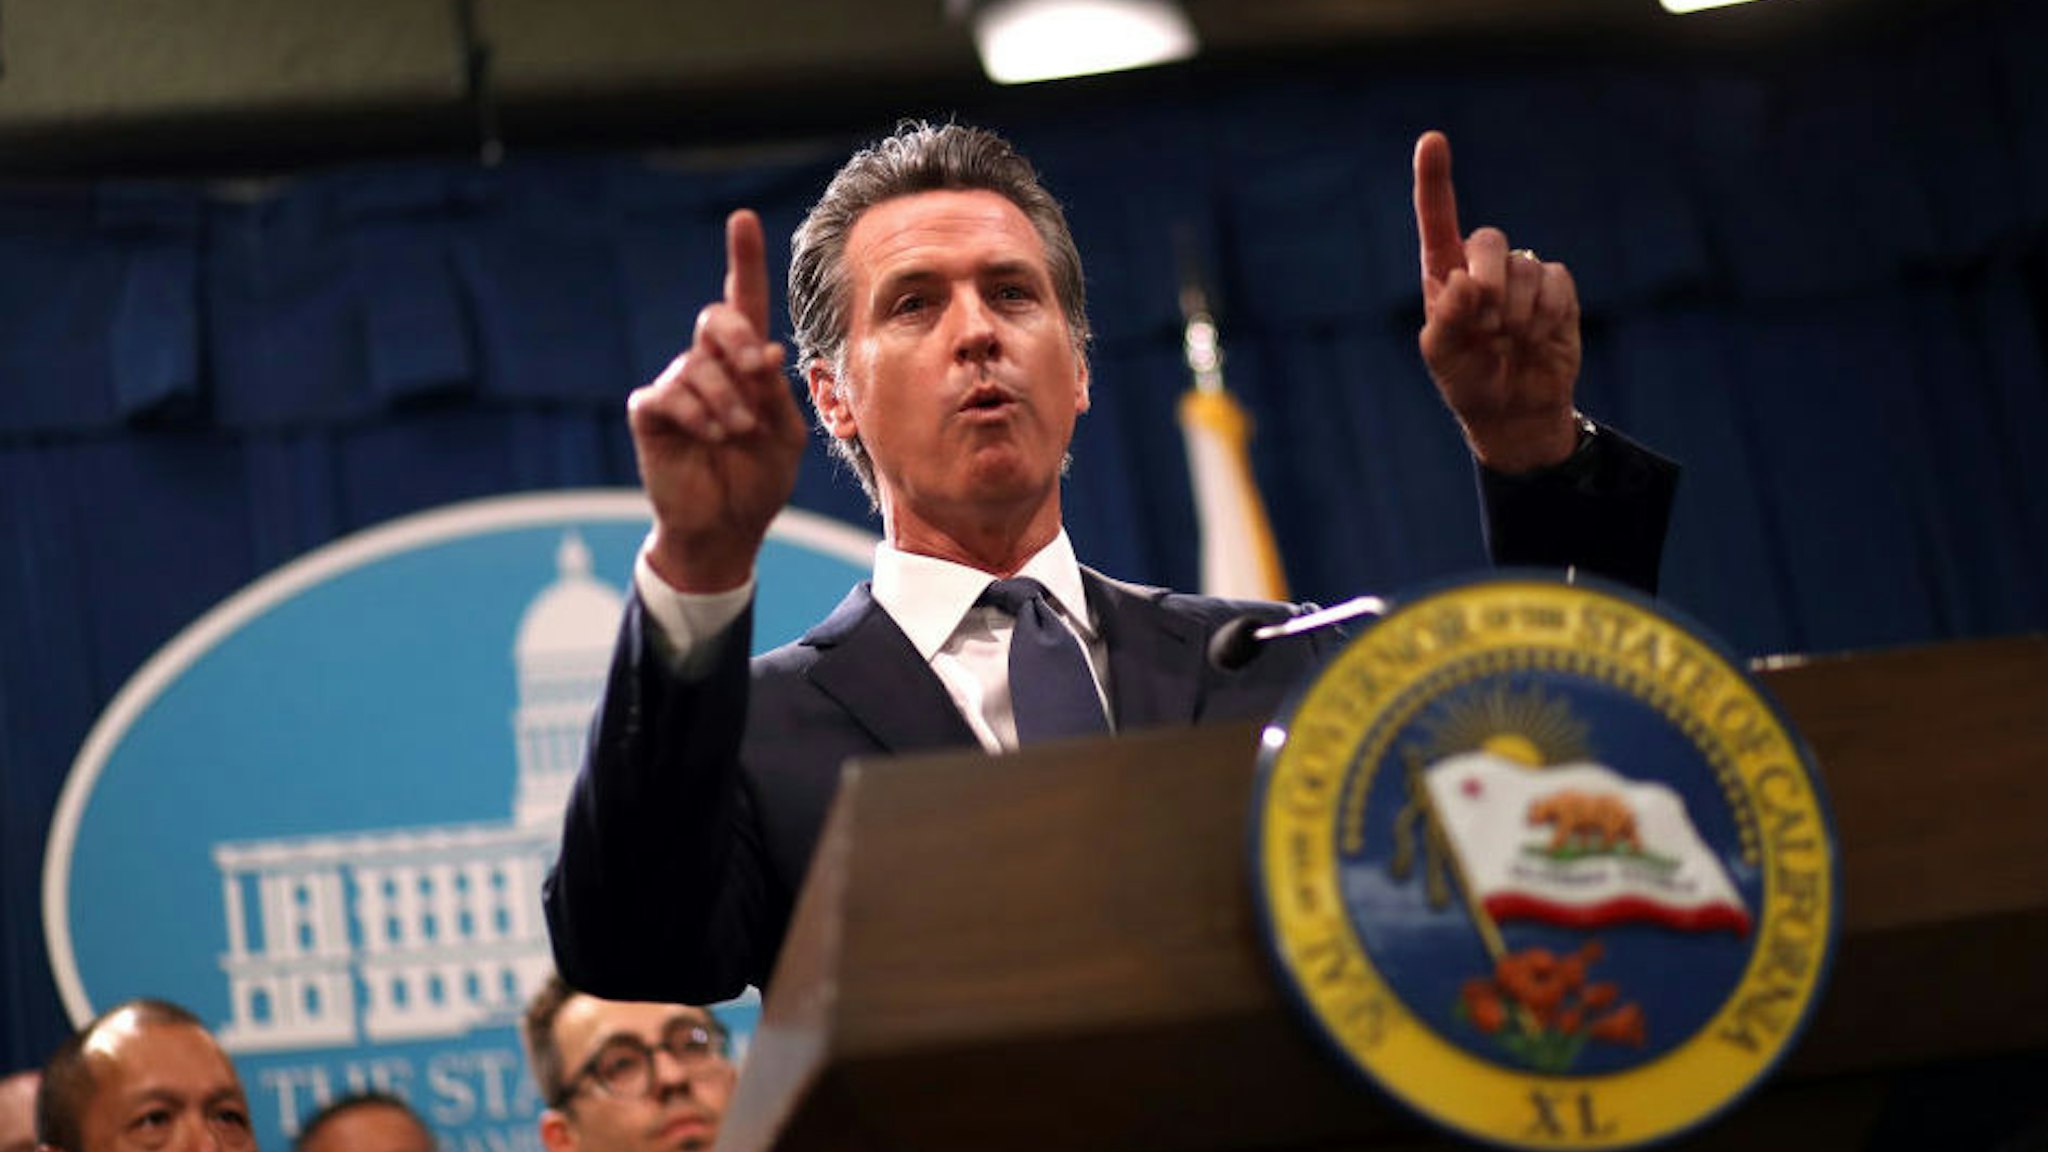 California Gov. Gavin Newsom speaks during a news conference with California attorney General Xavier Becerra at the California State Capitol on August 16, 2019 in Sacramento, California. California attorney genera Xavier Becerra and California Gov. Gavin Newsom announced that the State of California is suing the Trump administration challenging the legality of a new "public charge" rule that would make it difficult for immigrants to obtain green cards who receive public assistance like food stamps and Medicaid. (Photo by Justin Sullivan/Getty Images)